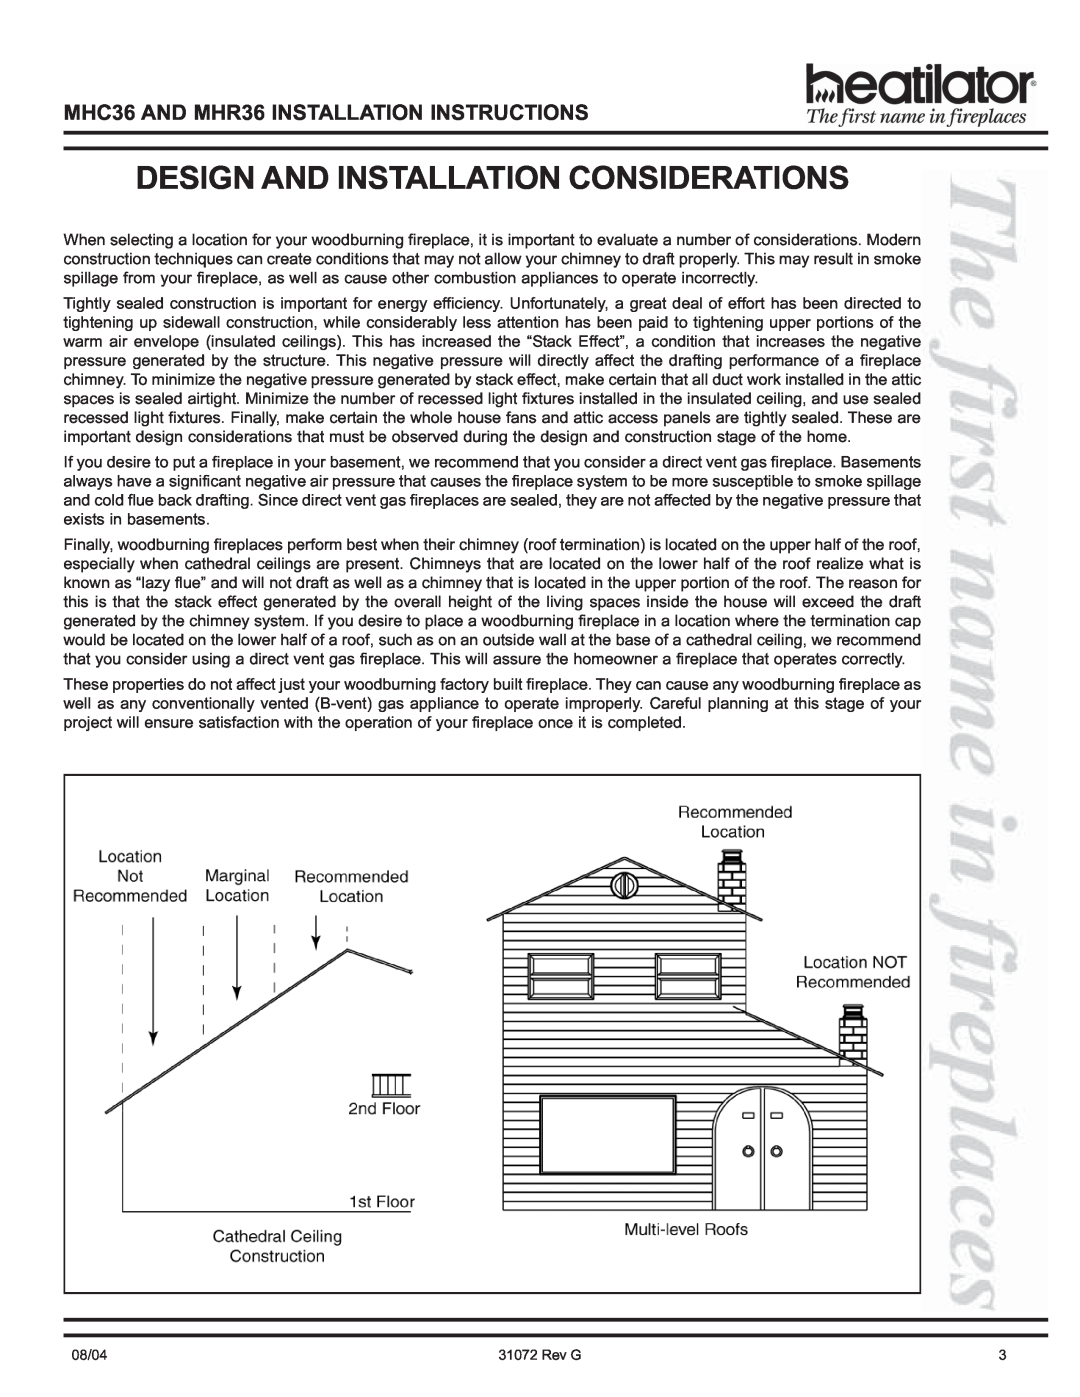 Heart & Home Collectables manual Design And Installation Considerations, MHC36 AND MHR36 INSTALLATION INSTRUCTIONS 